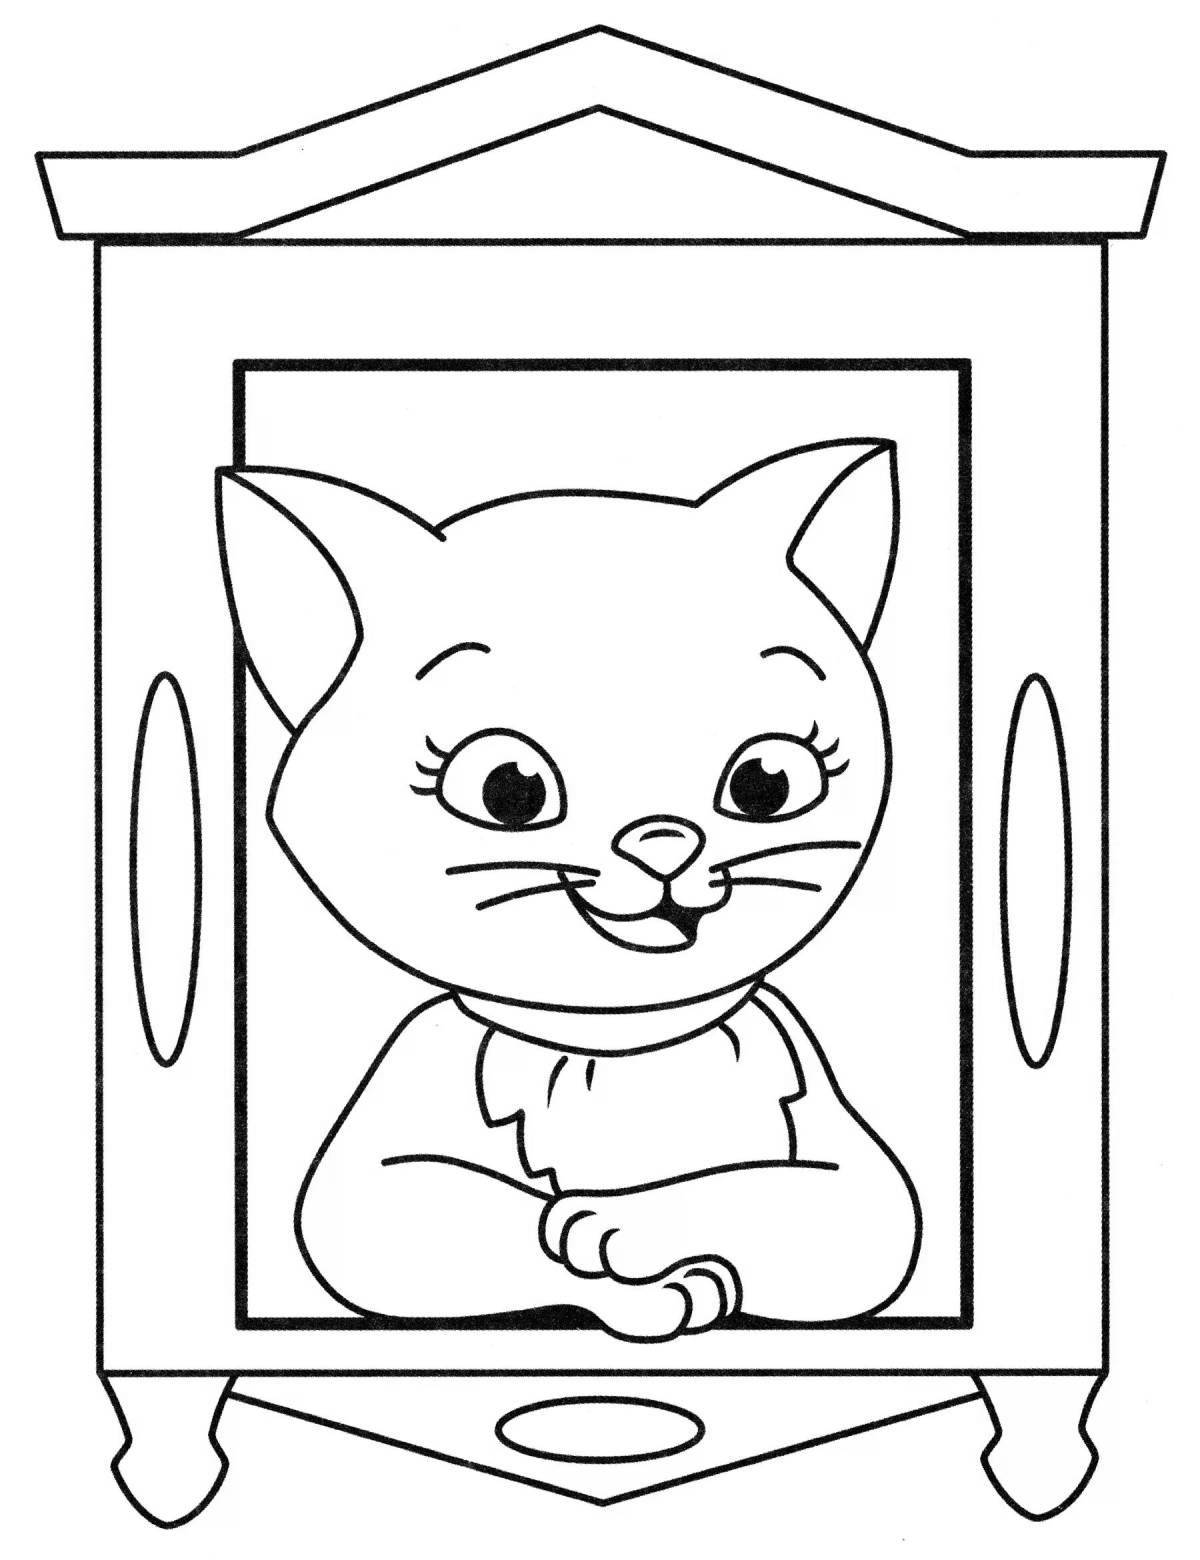 Coloring page mischievous kitten in the house